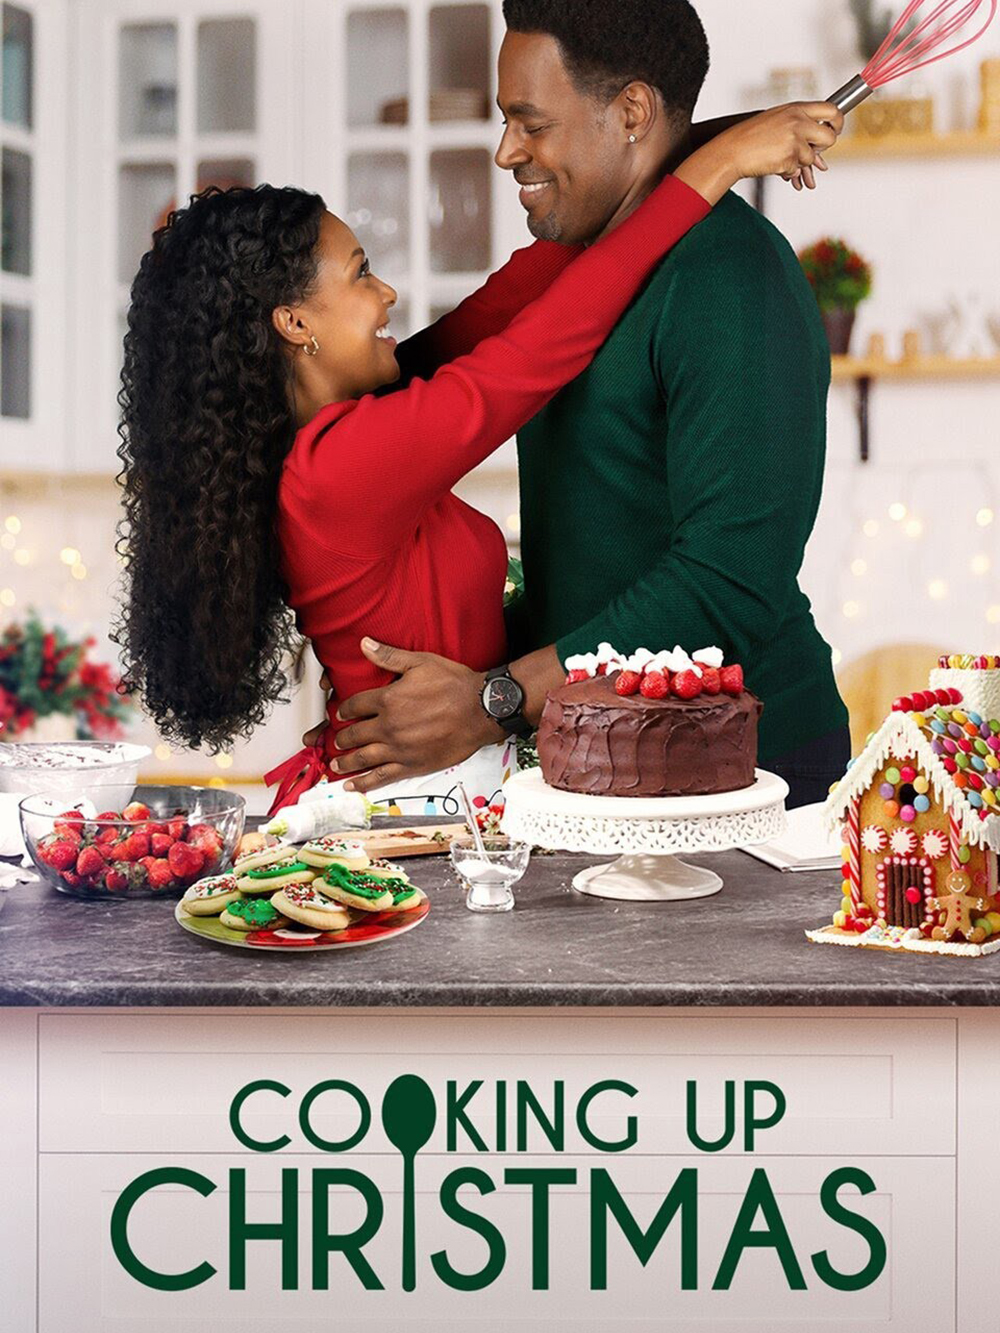 Cooking Up Christmas (2020, Holiday)